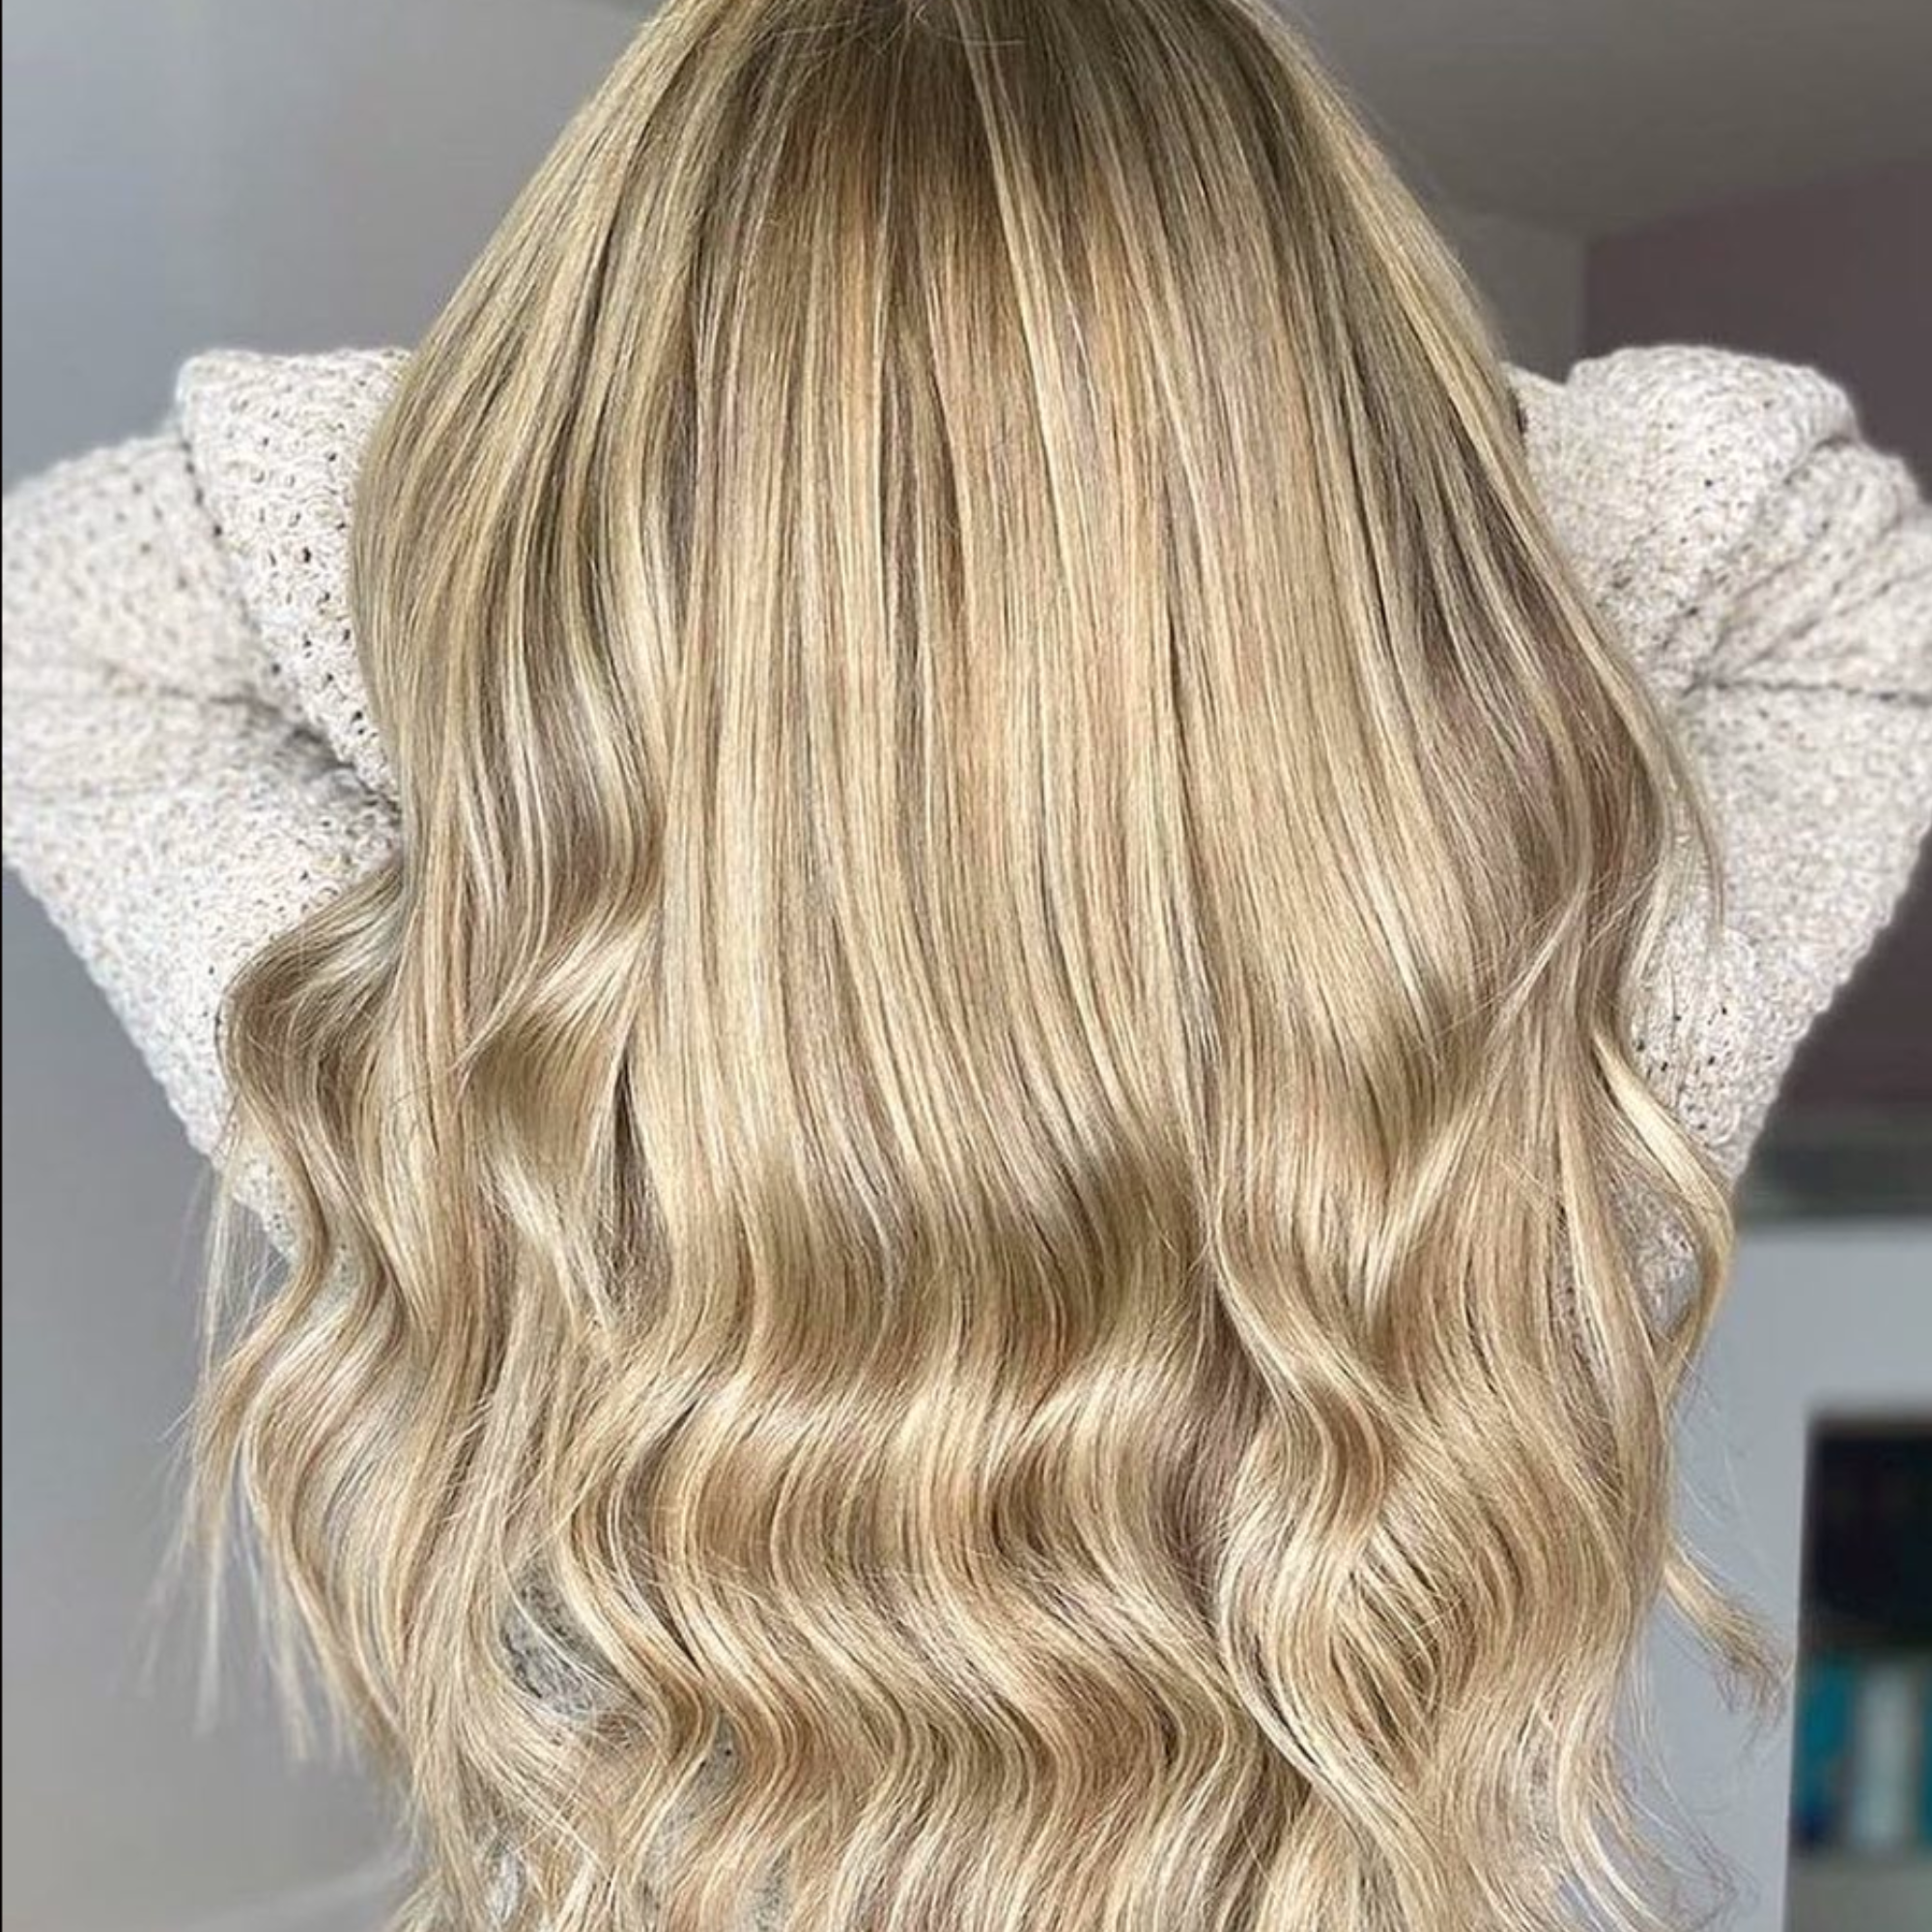 "hair rehab london 14" weft hair extensions shade swatch titled coachella blonde"